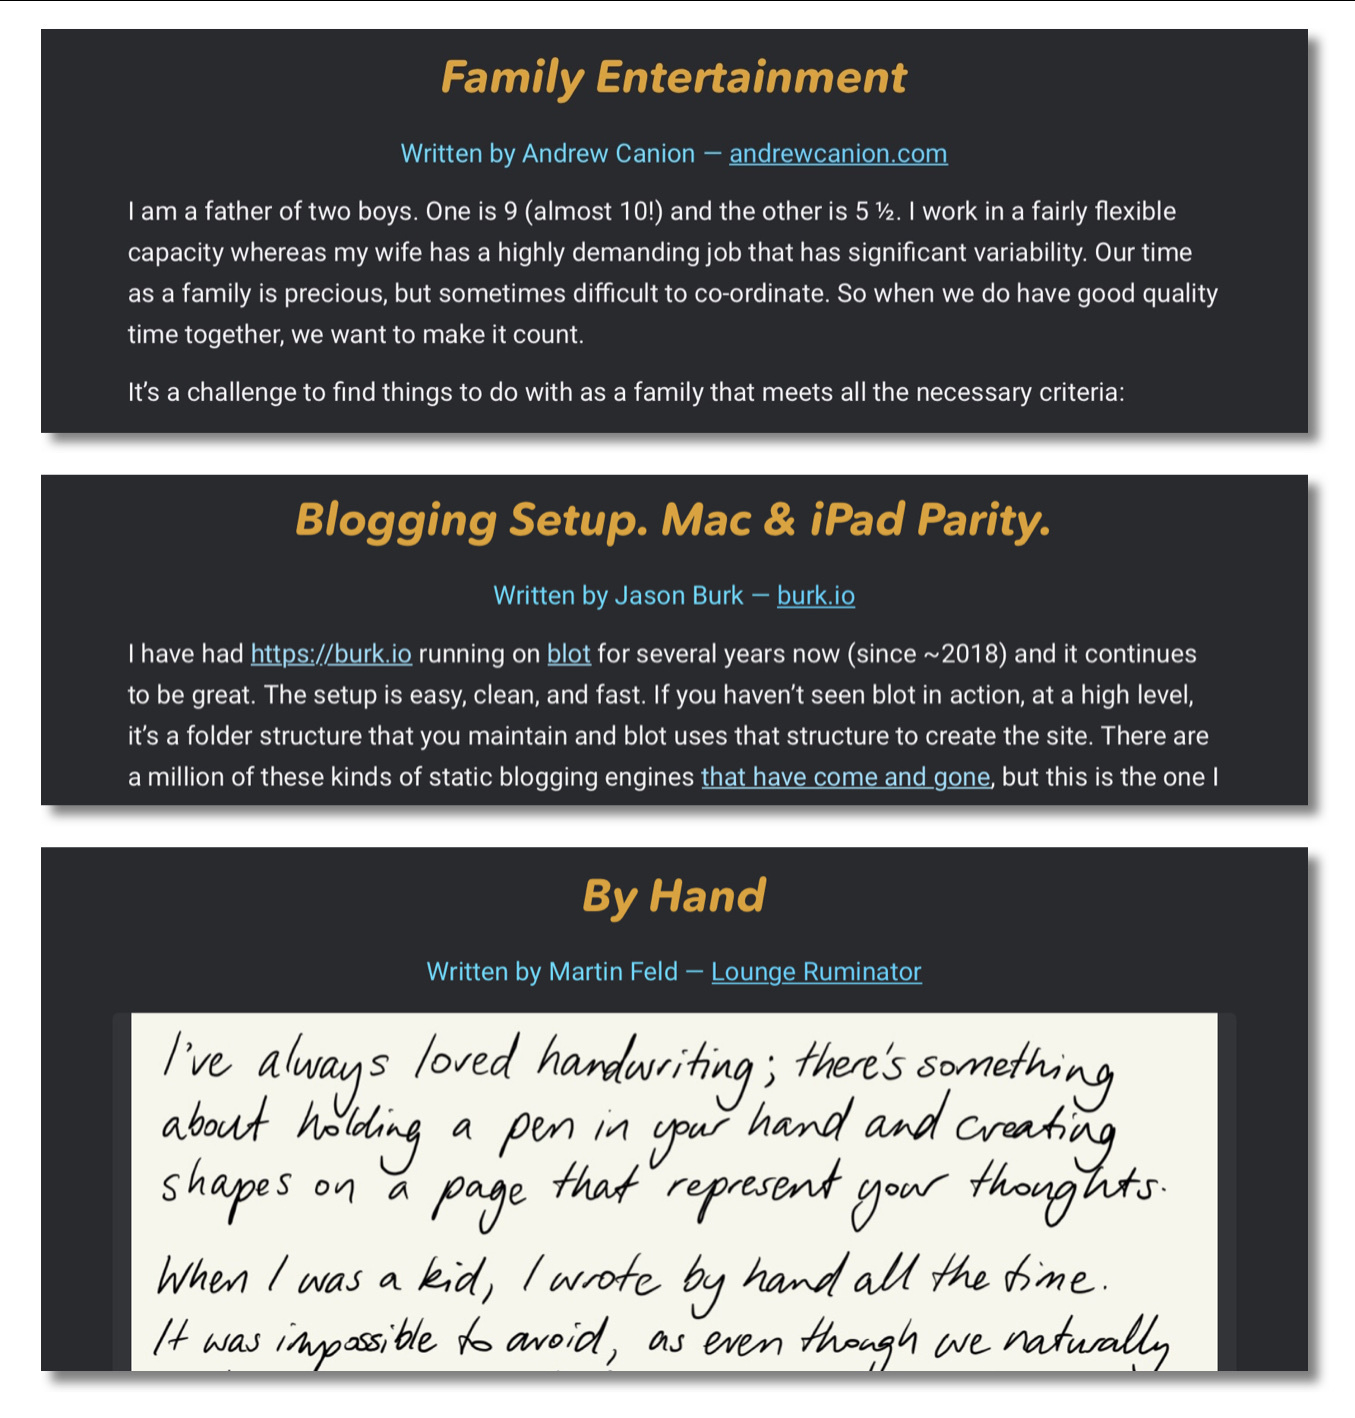 Three article previews, with the titles 'Family Entertainment', 'Blogging Setup' and 'By Hand'